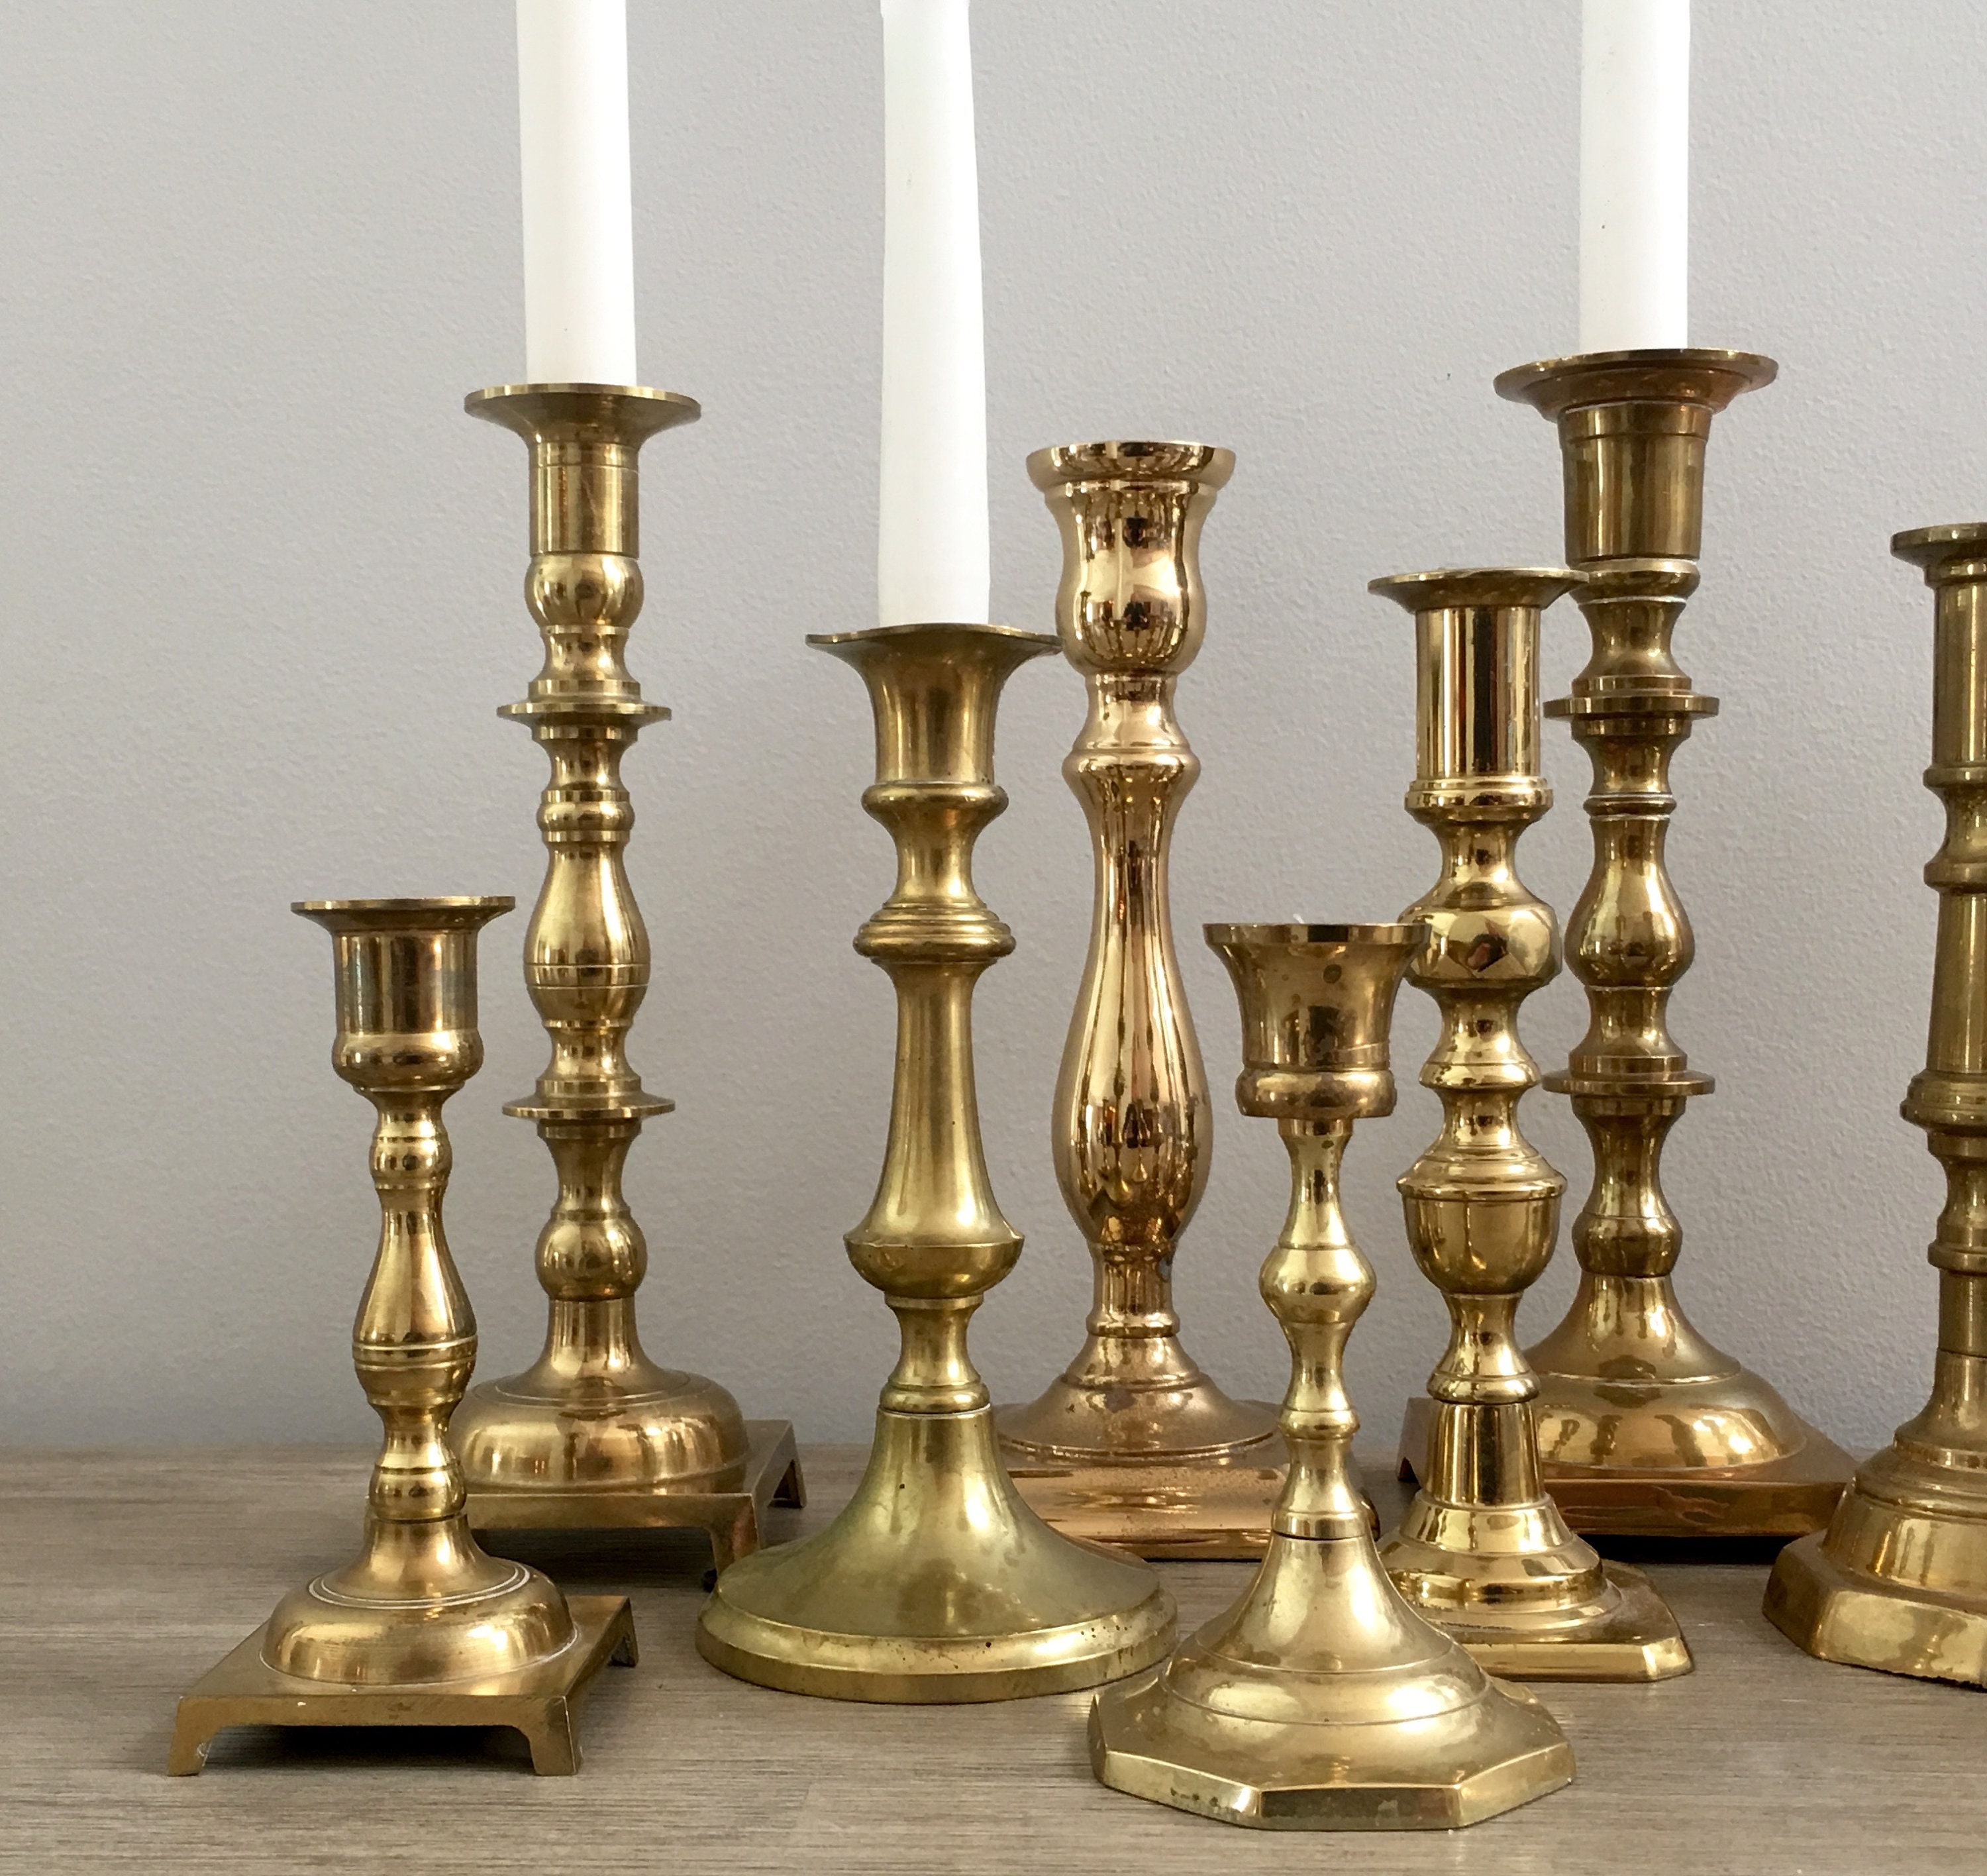 Vintage Candle Holders - Photos All Recommendation